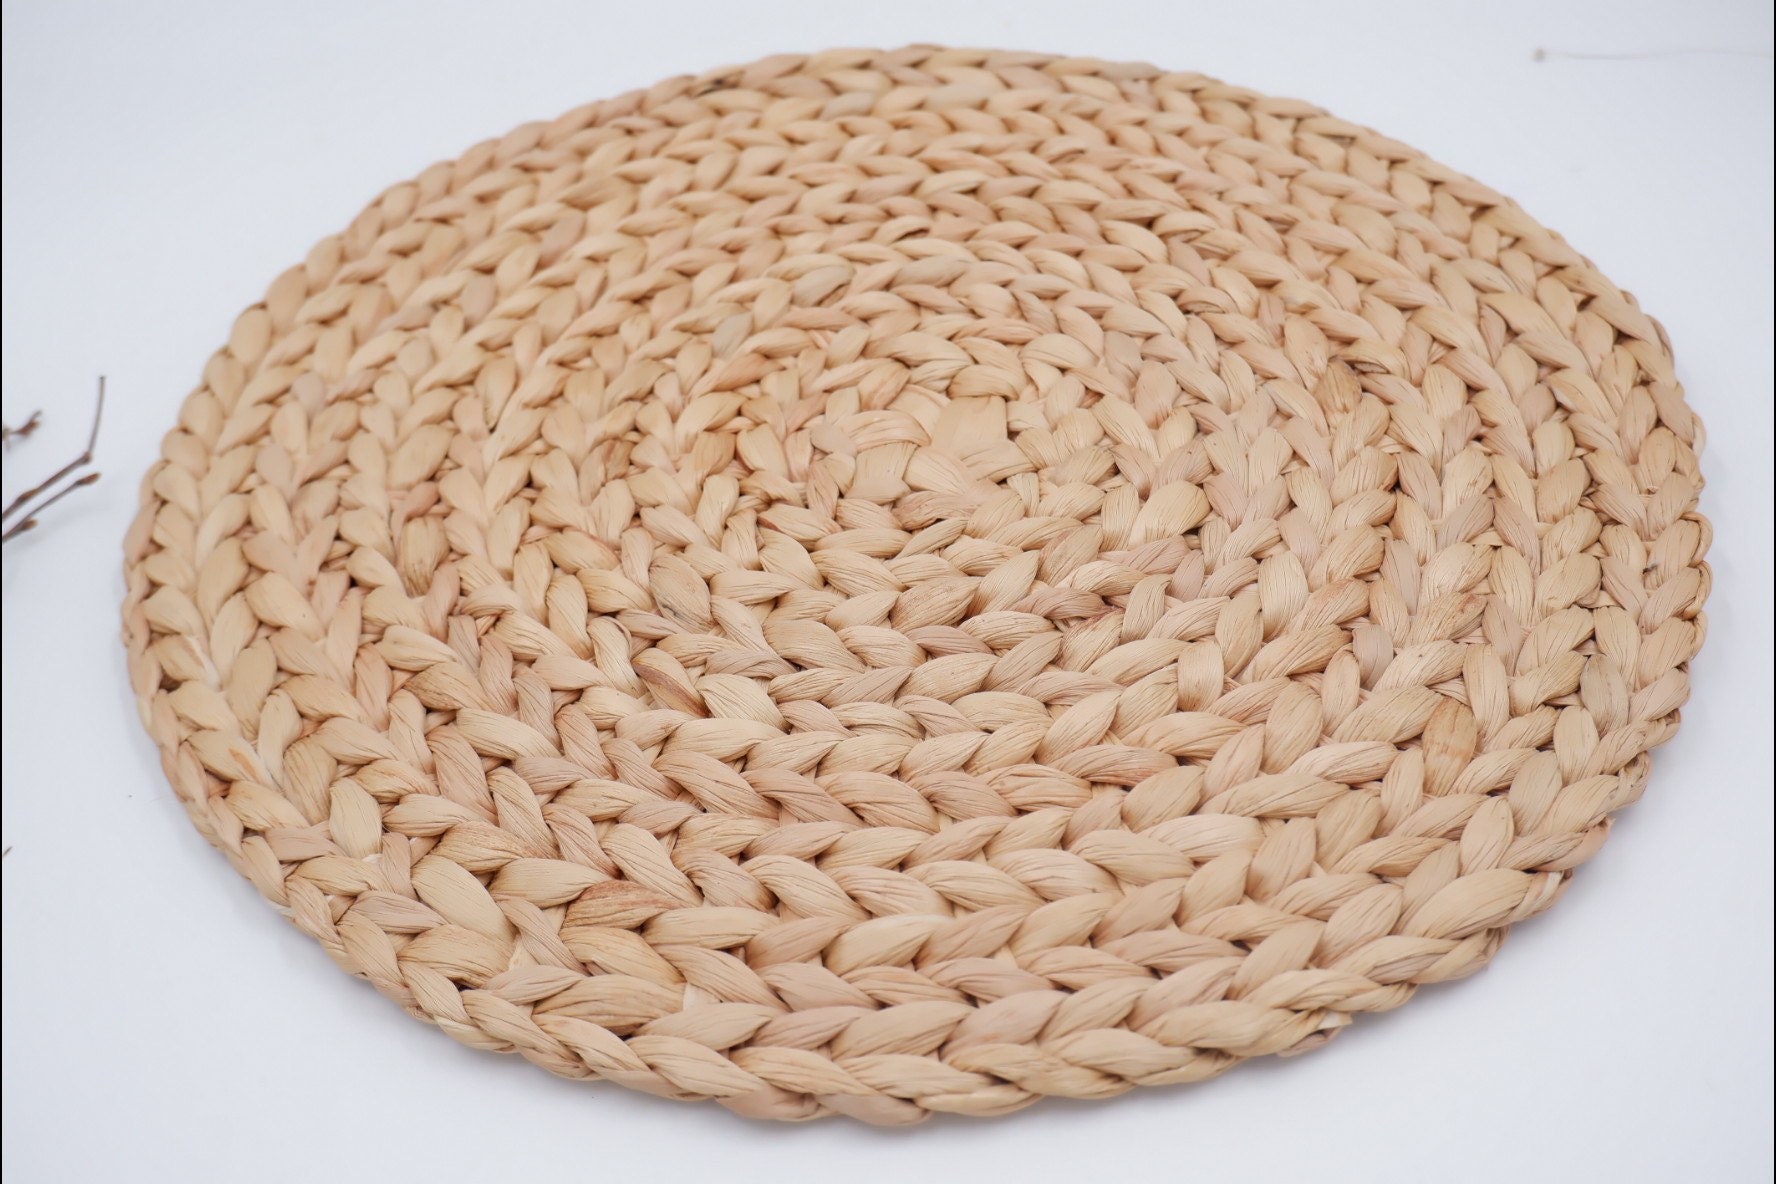 Water hyacinth placemats, round woven - 35cm diameter » Variant Name: 4  pieces, Color: Natural